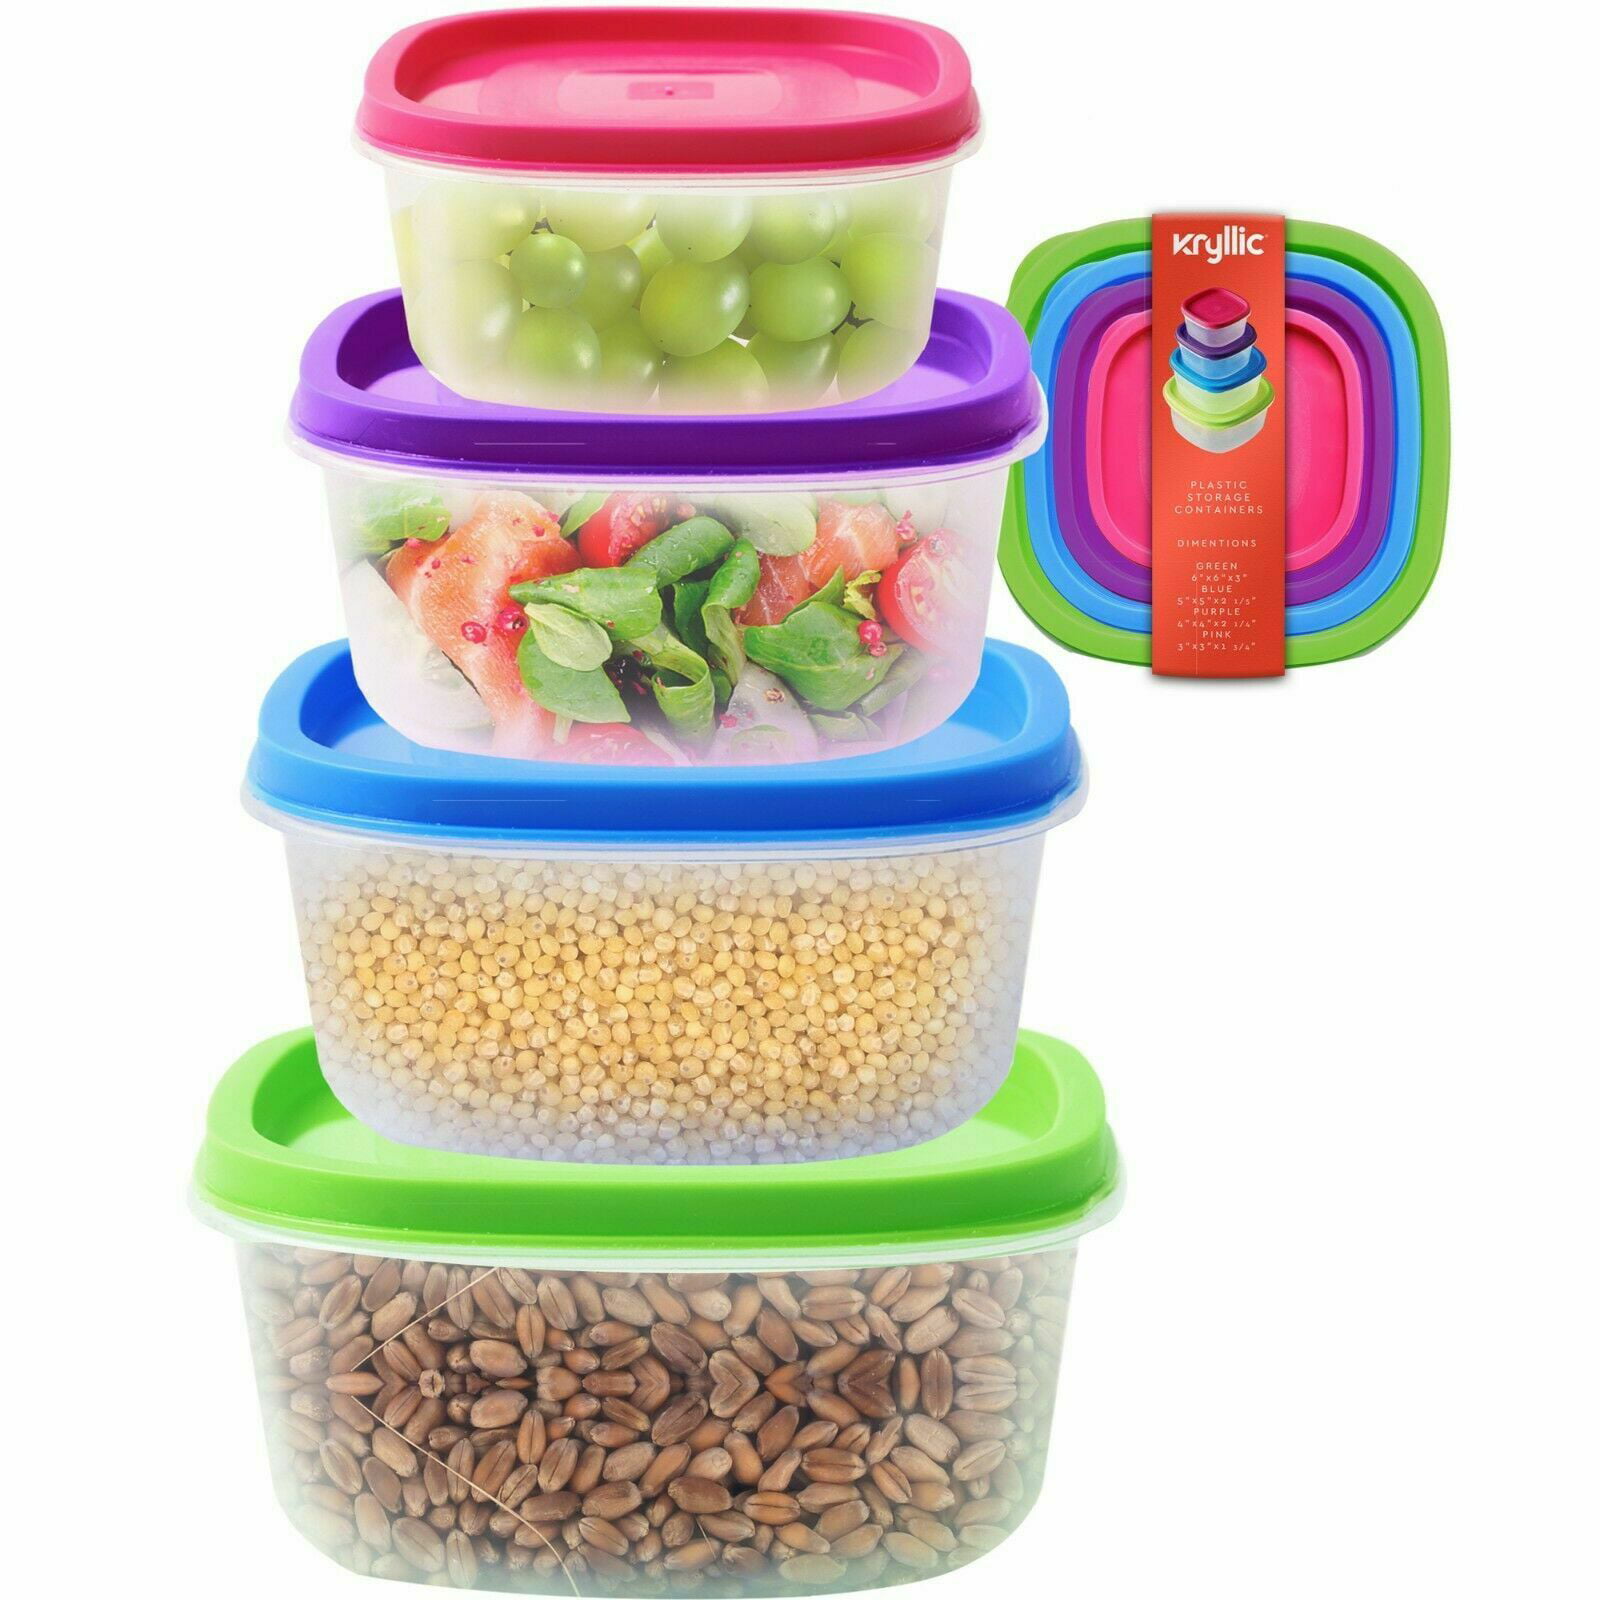 Plastic Food Storage Containers 4 sizes airtight Lids nesting stackable bpa free 